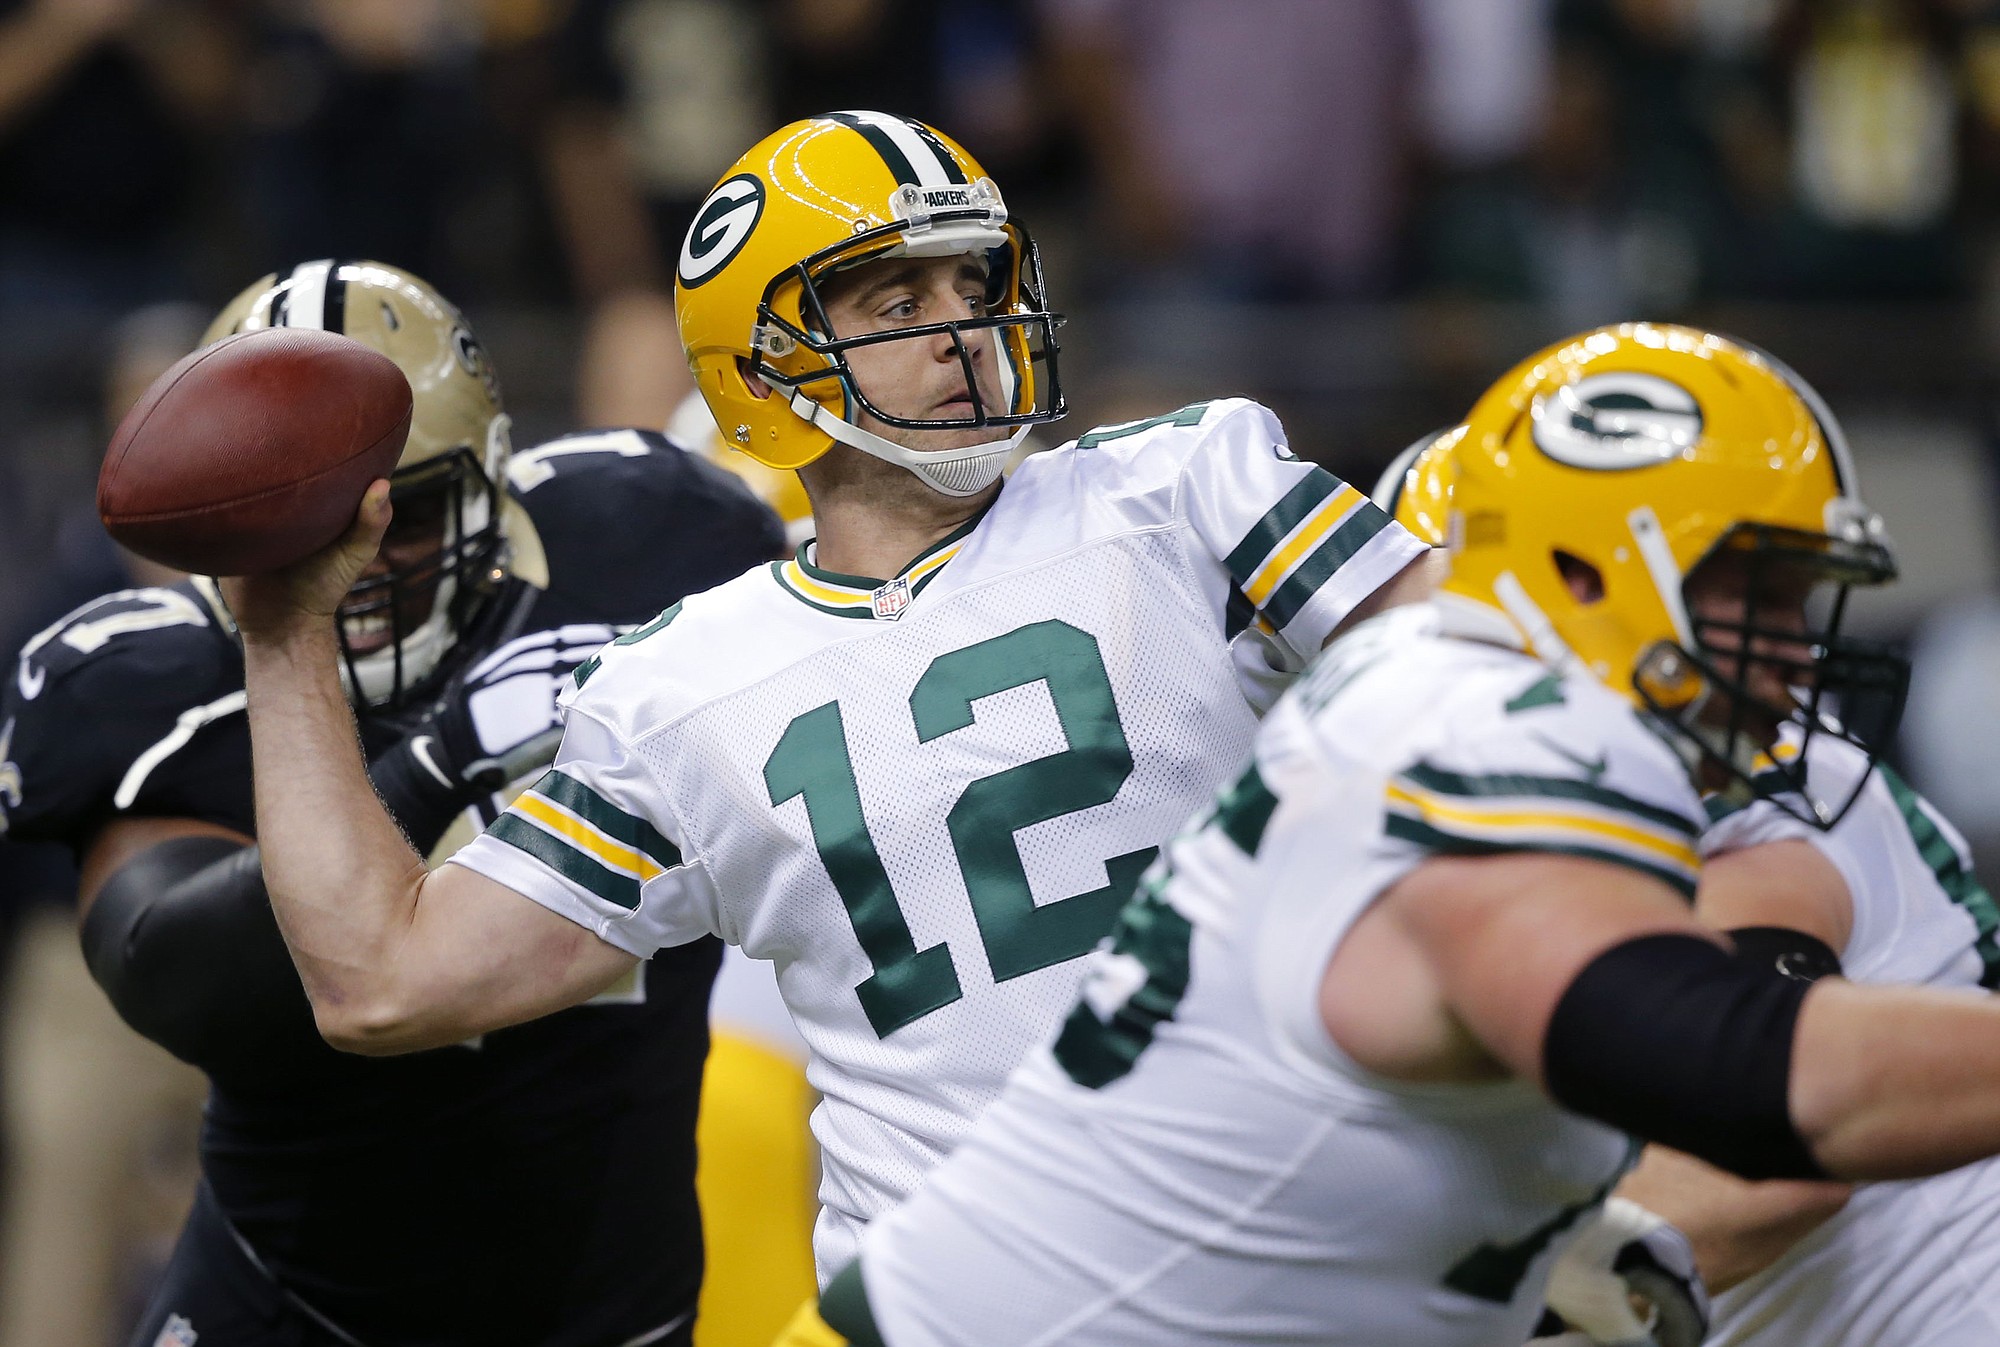 Green Bay Packers quarterback Aaron Rodgers won his second Associated Press NFL Most Valuable Player award, which was announced on Sunday, Jan. 31, 2015.